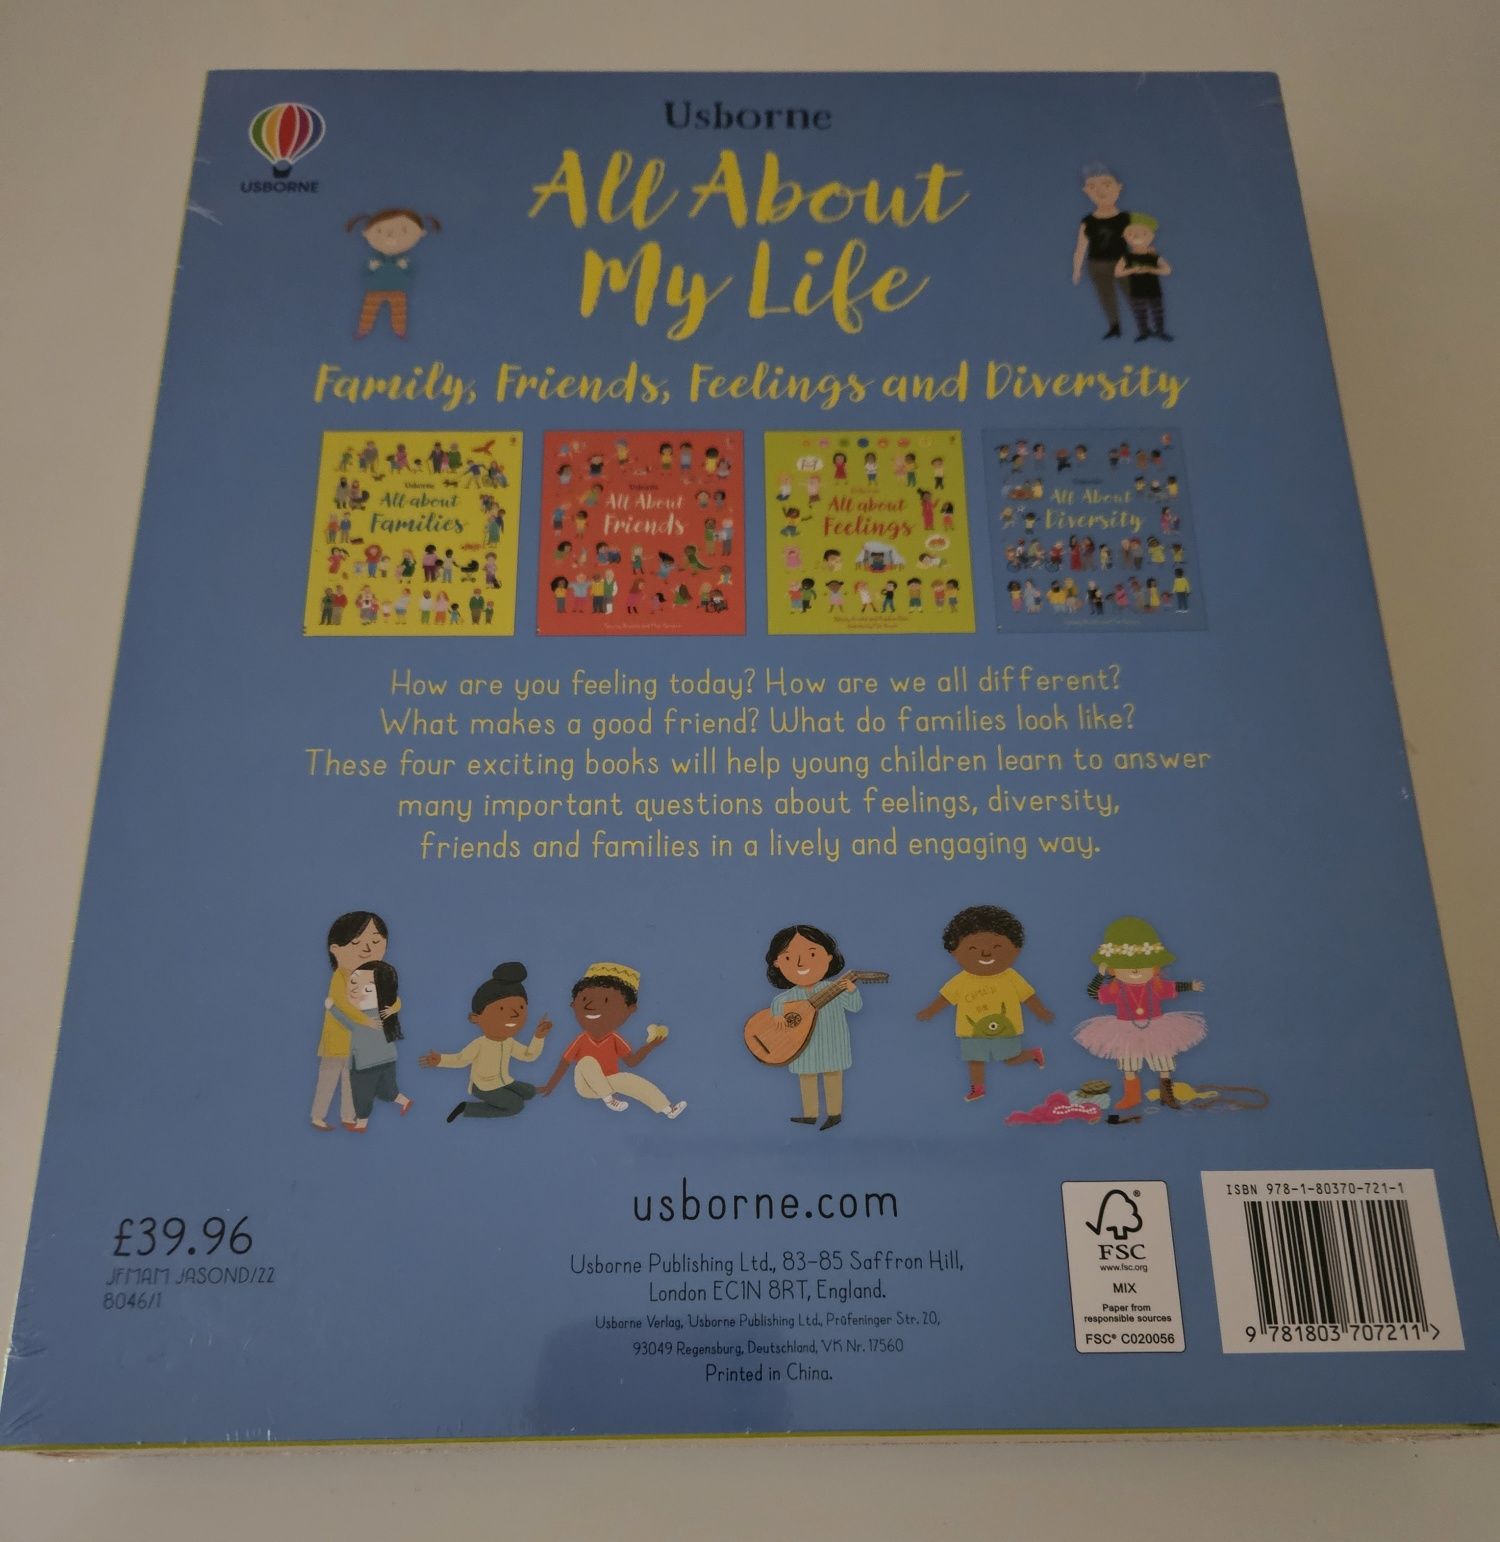 All about my life Usborne